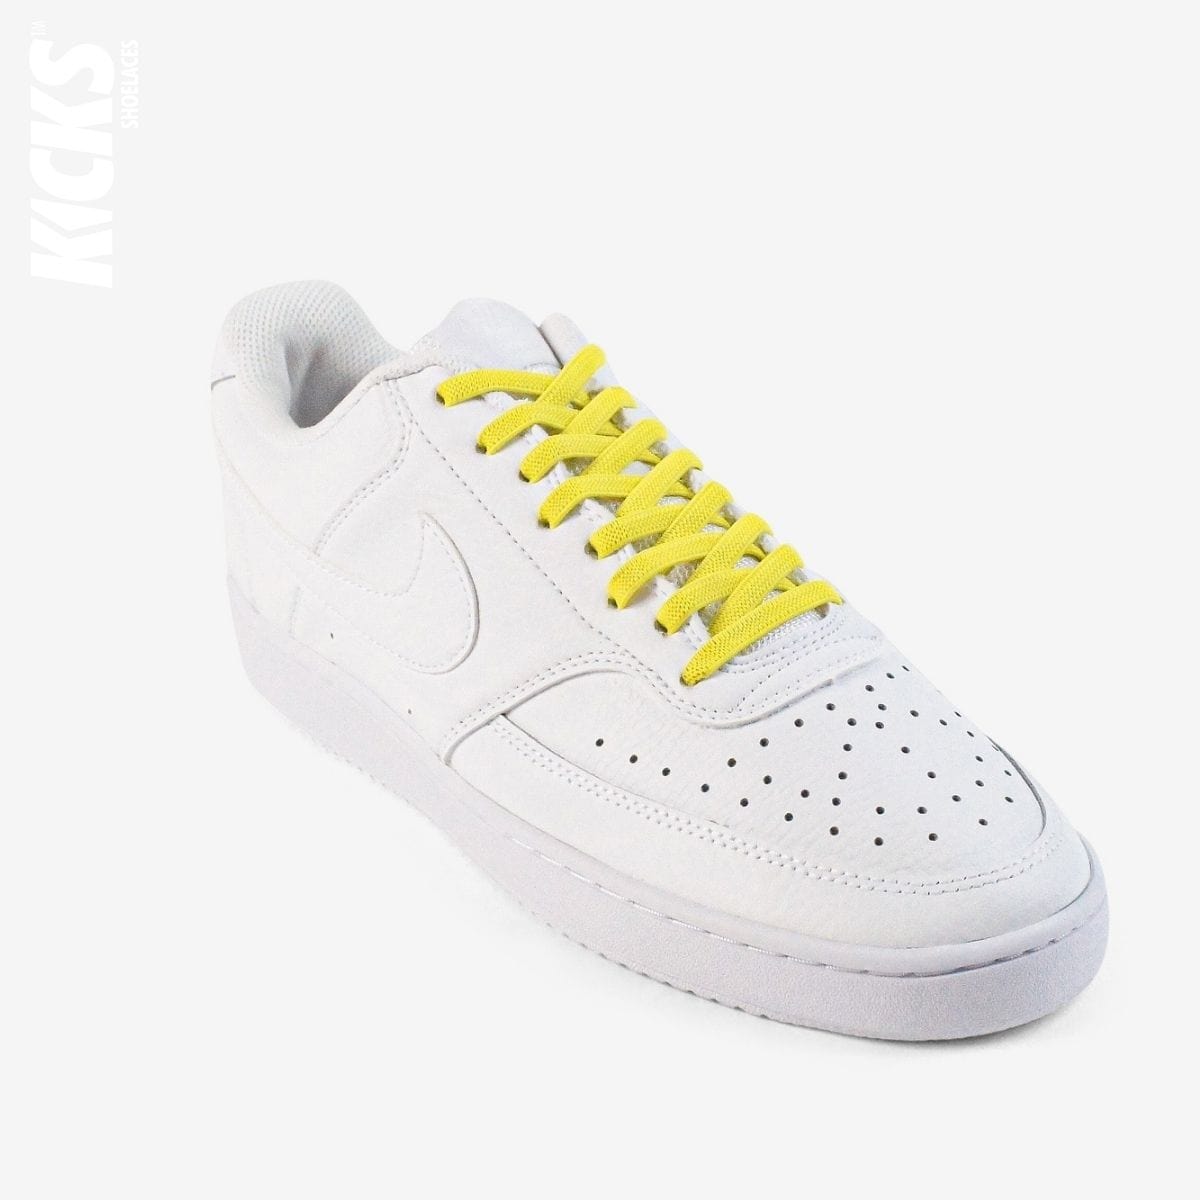 no-tie-shoelaces-with-yellow-laces-on-nike-white-sneakers-by-kicks-shoelaces